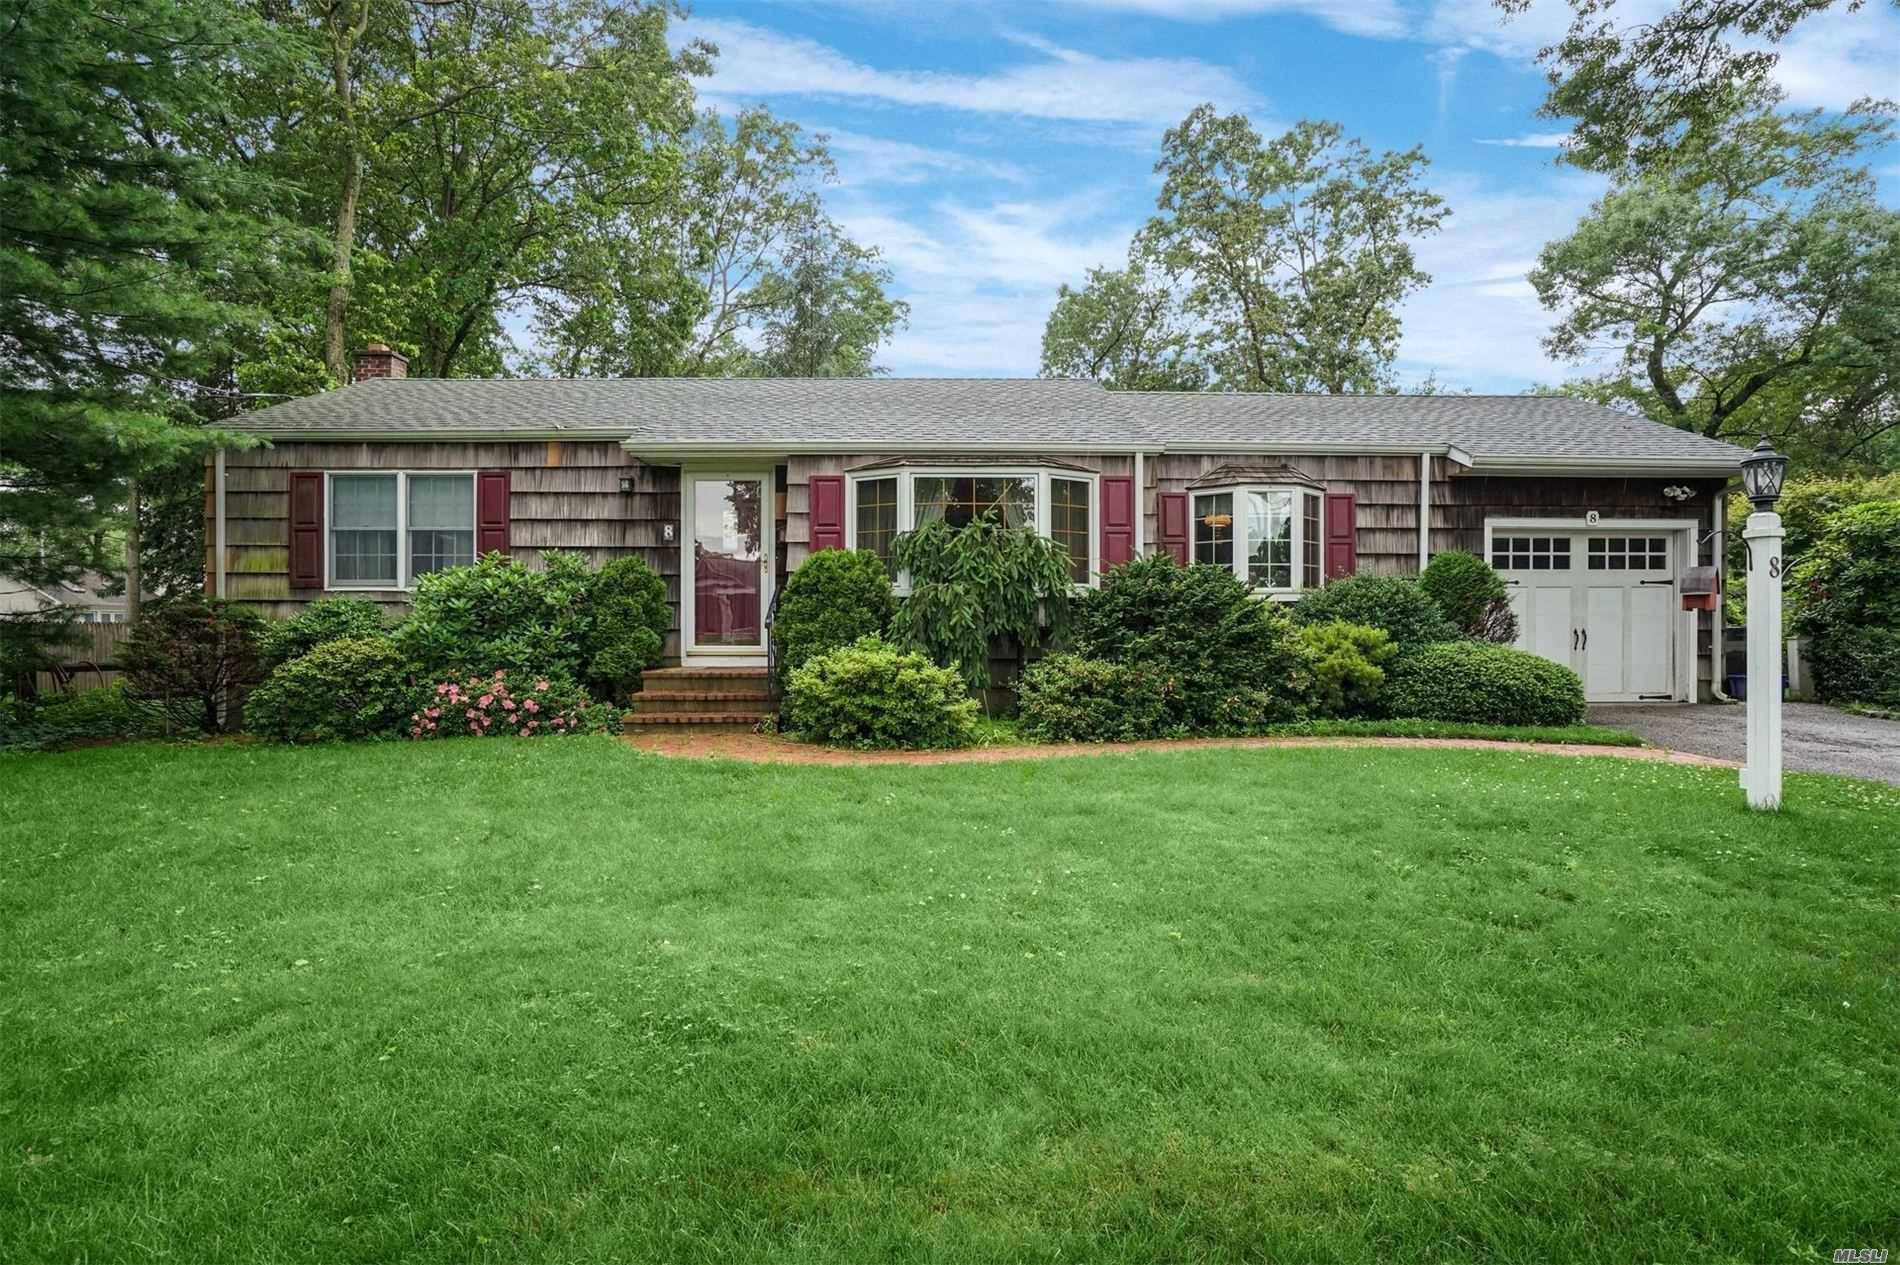 This Nicely Kept Ranch Style Home Sits On A Quiet Tree Lined Street In Sought After East Northport Northport Schools.